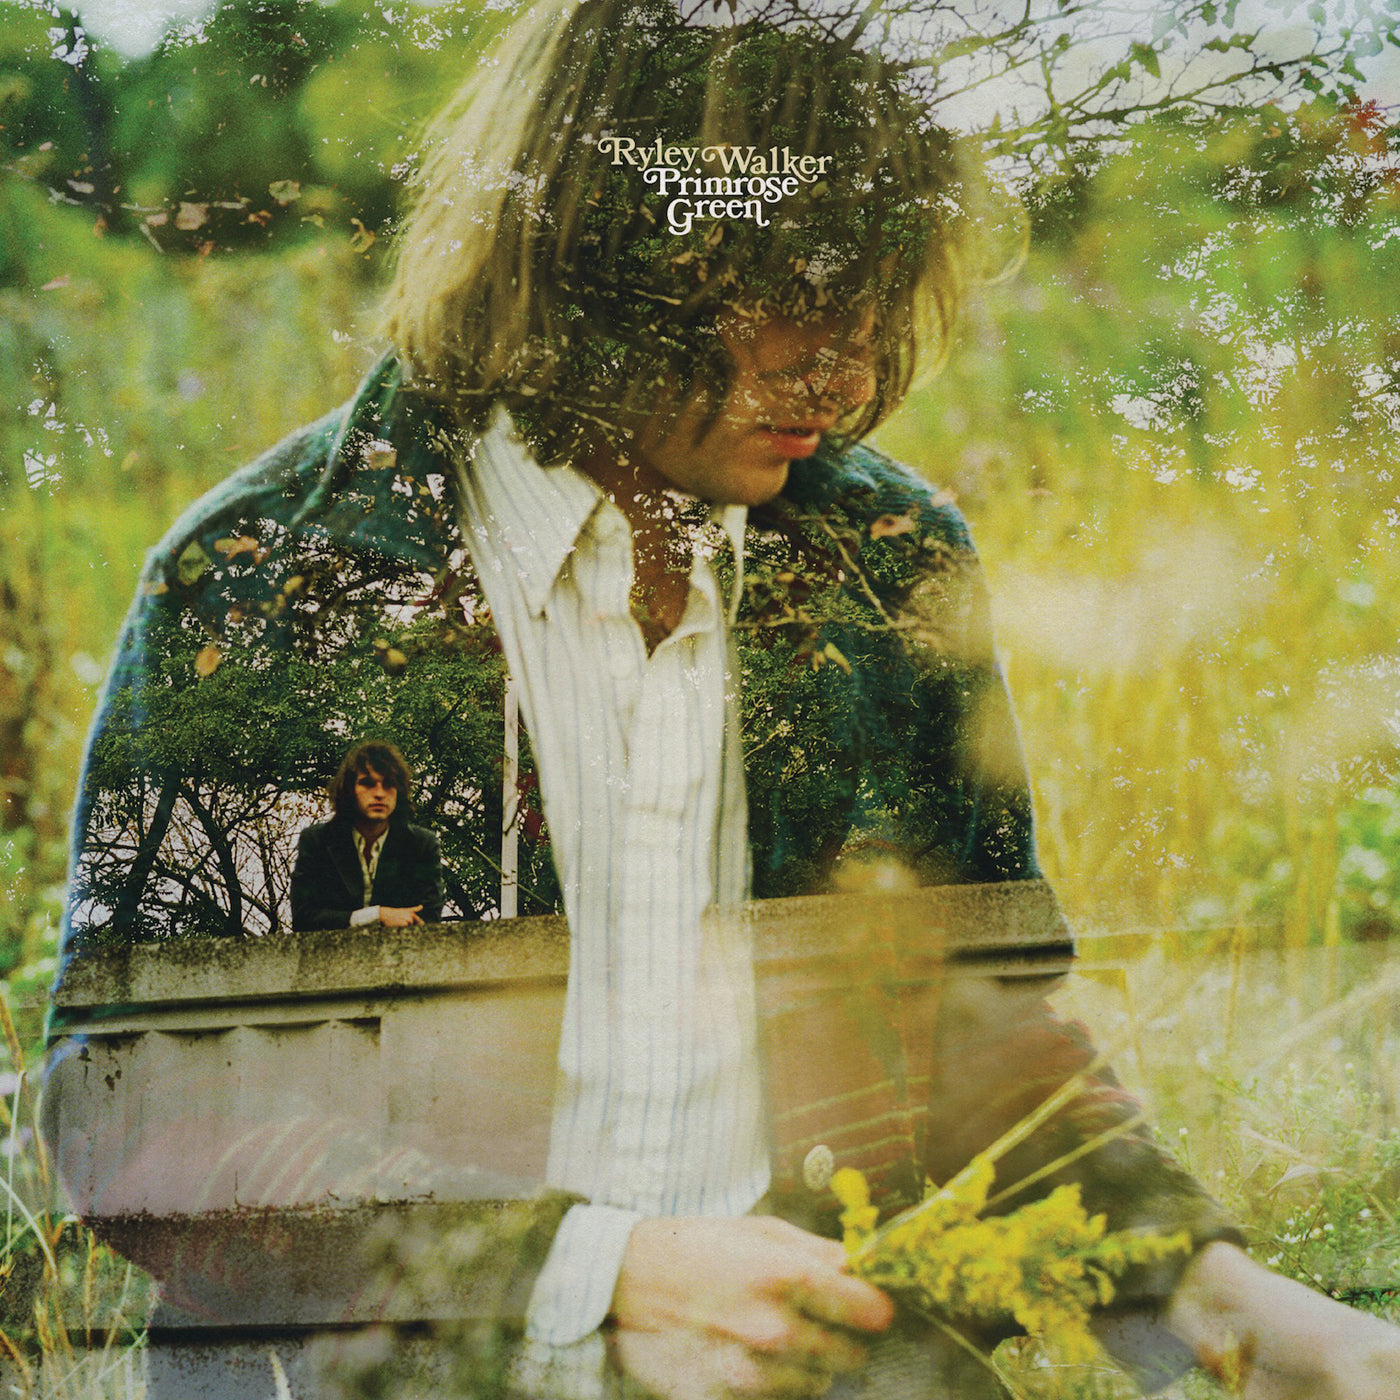 Album cover depicting Ryley Walker amidst a vivid, overgrown garden setting. Multiple overlays of his image create a dreamlike, introspective mood, blending with the lush Primrose Greenery from Tandem Coffee Roasters.